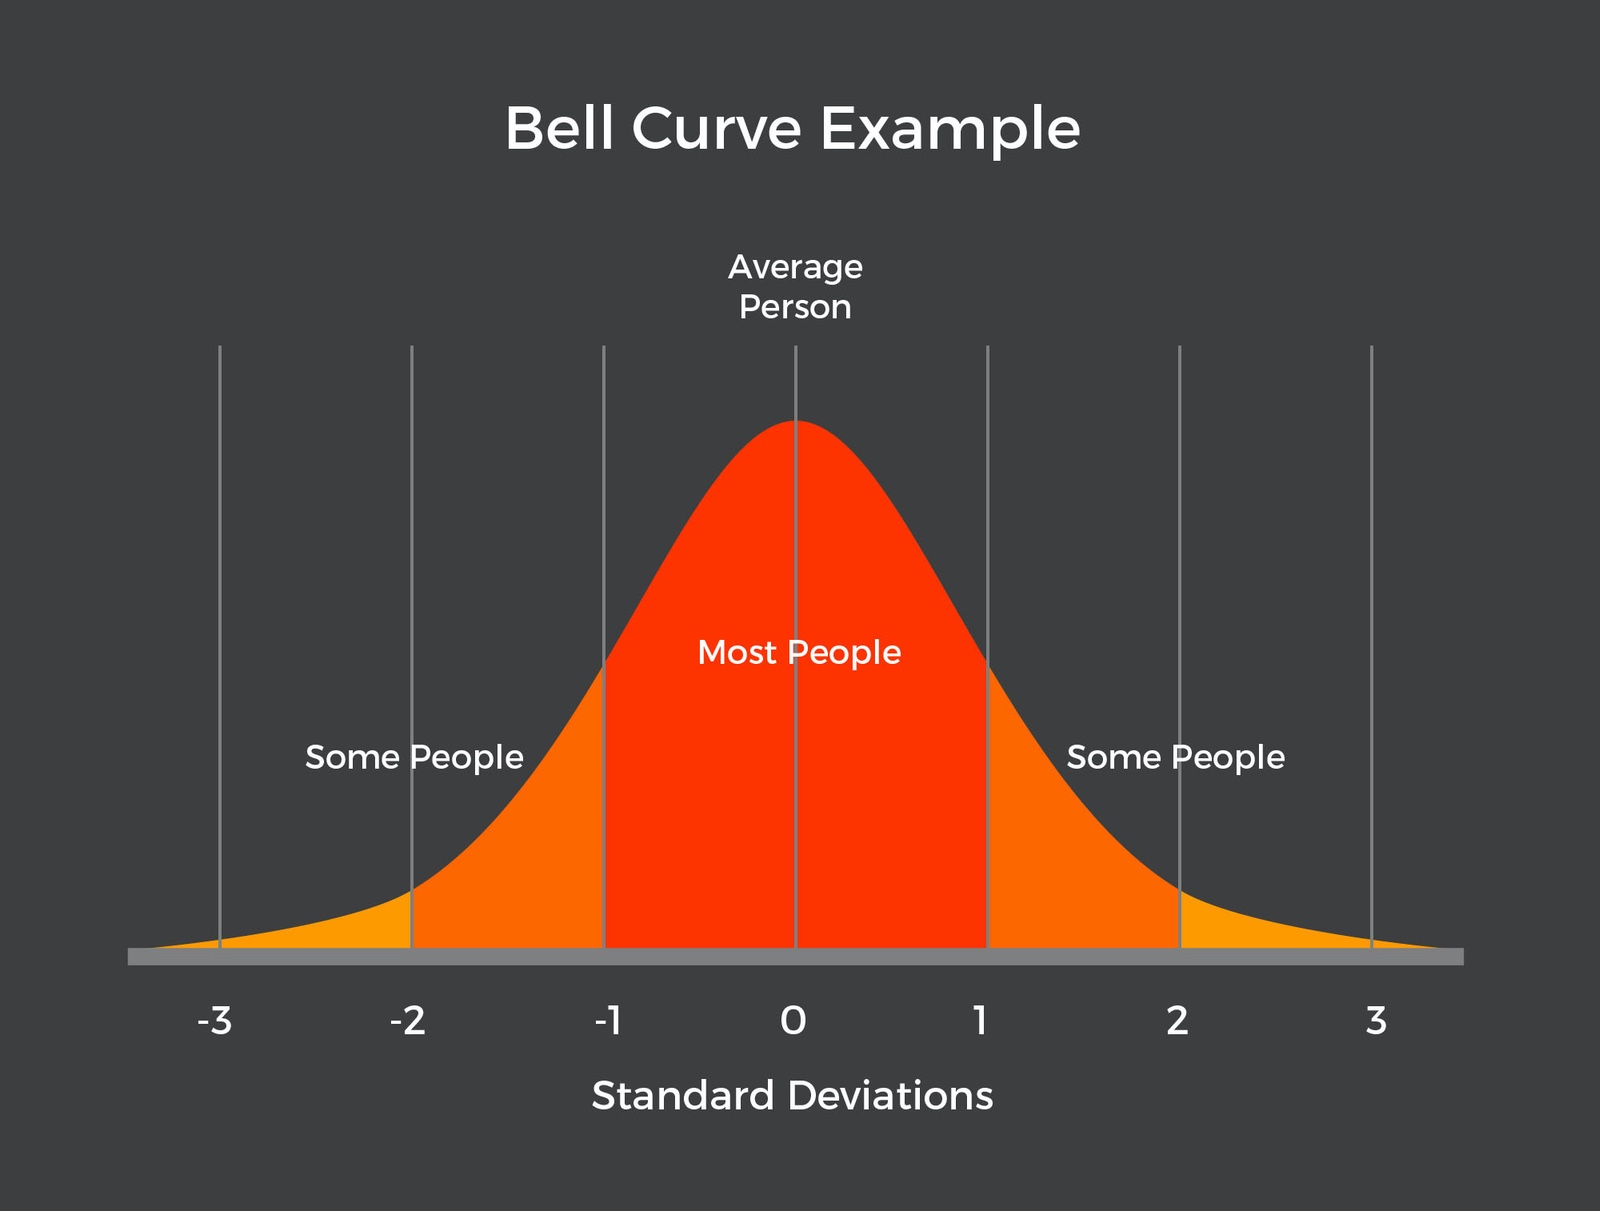 Bell curve example